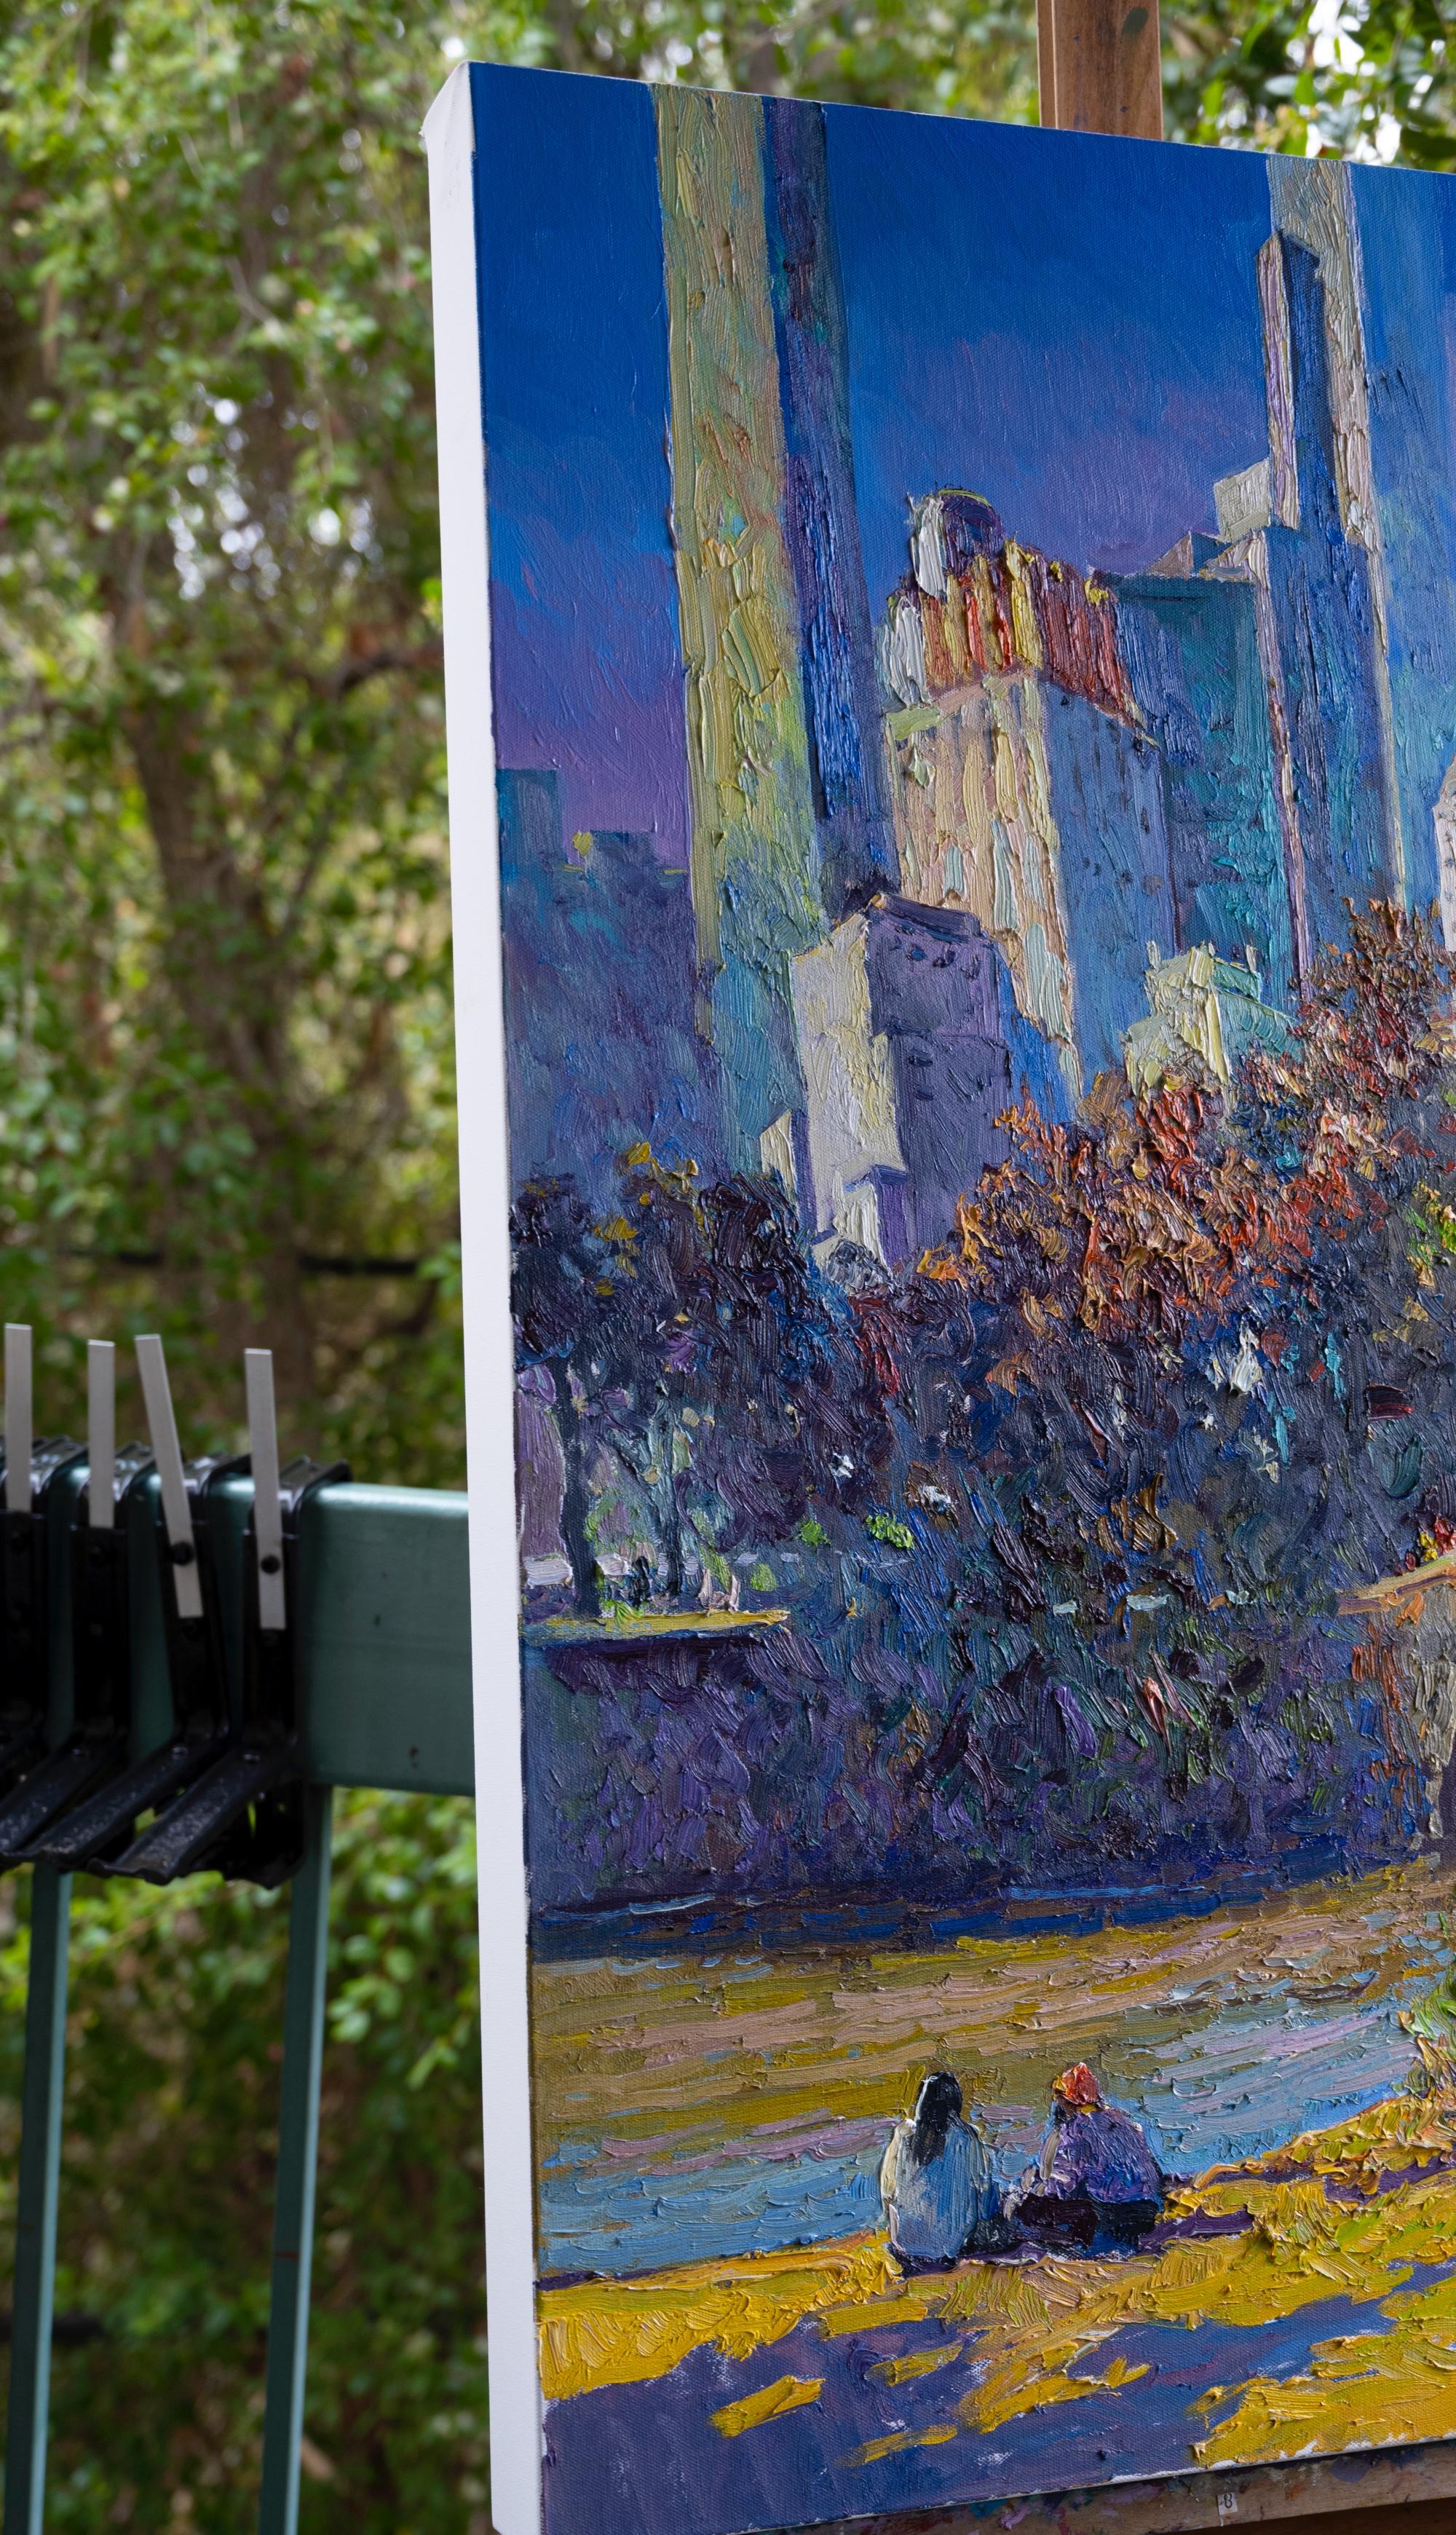 <p>Artist Comments<br>Artist Suren Nersisyan depicts a section of Central Park, one of the most iconic parks in New York City. Figures sit by the edge of a river, admiring the peaceful scenery in the middle of tall skyscrapers. Suren's textured